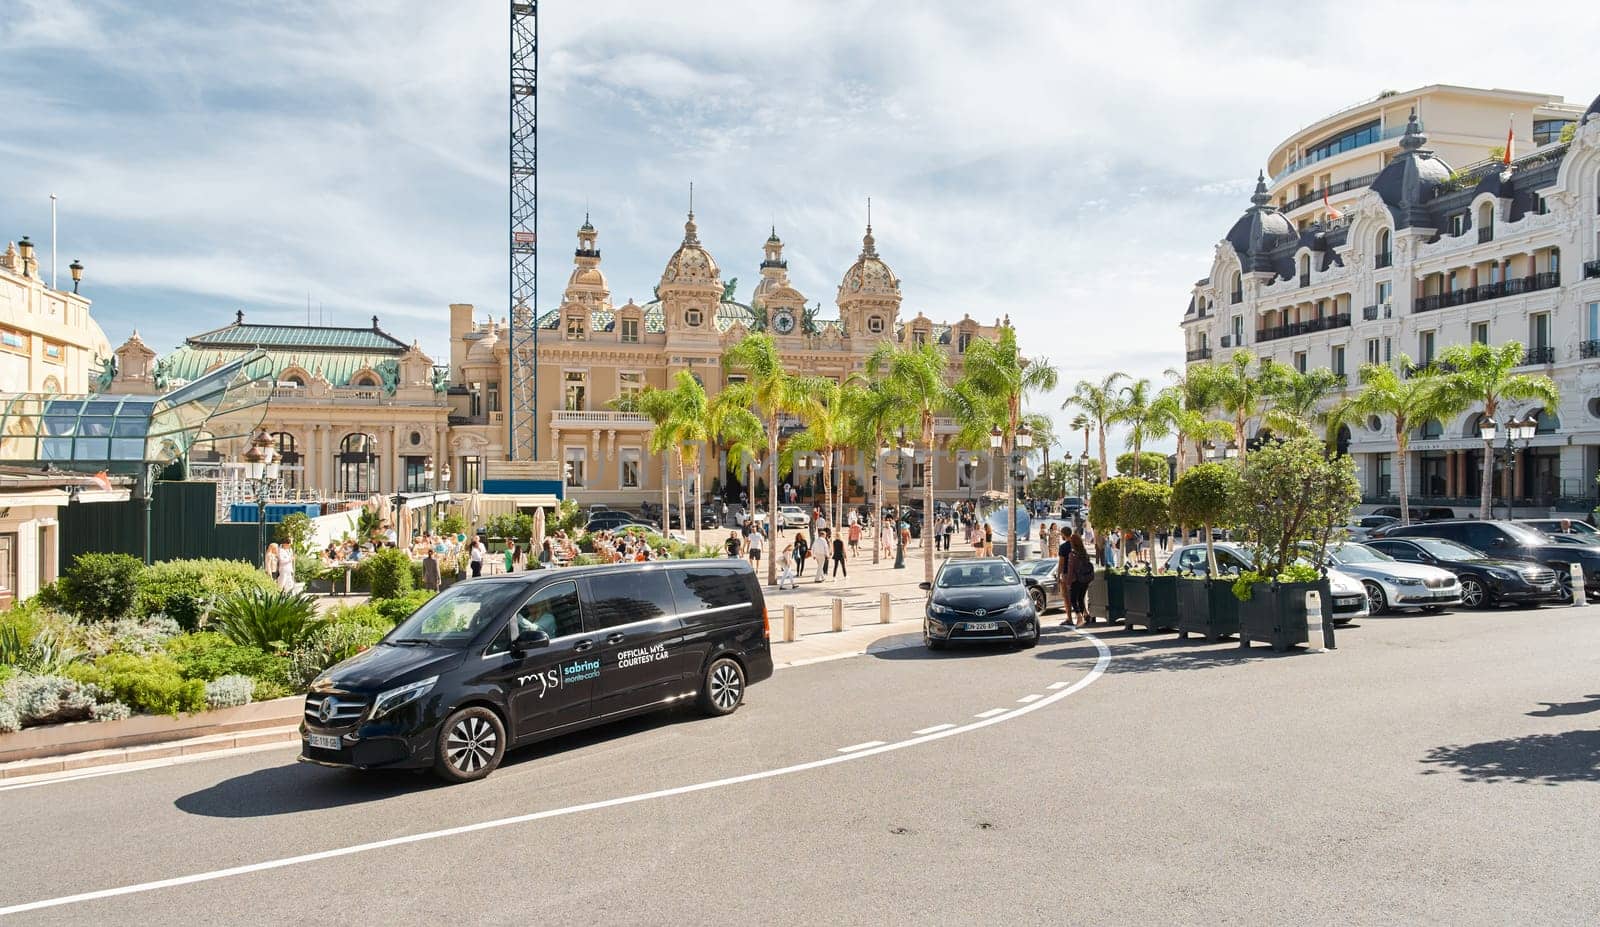 Monaco, Monte-Carlo, 29 September 2022 - Square Casino Monte-Carlo at sunny day, luxury cars, famous Hotel de Paris, wealth life, tourists take pictures of the landmark, pine trees, flowers by vladimirdrozdin